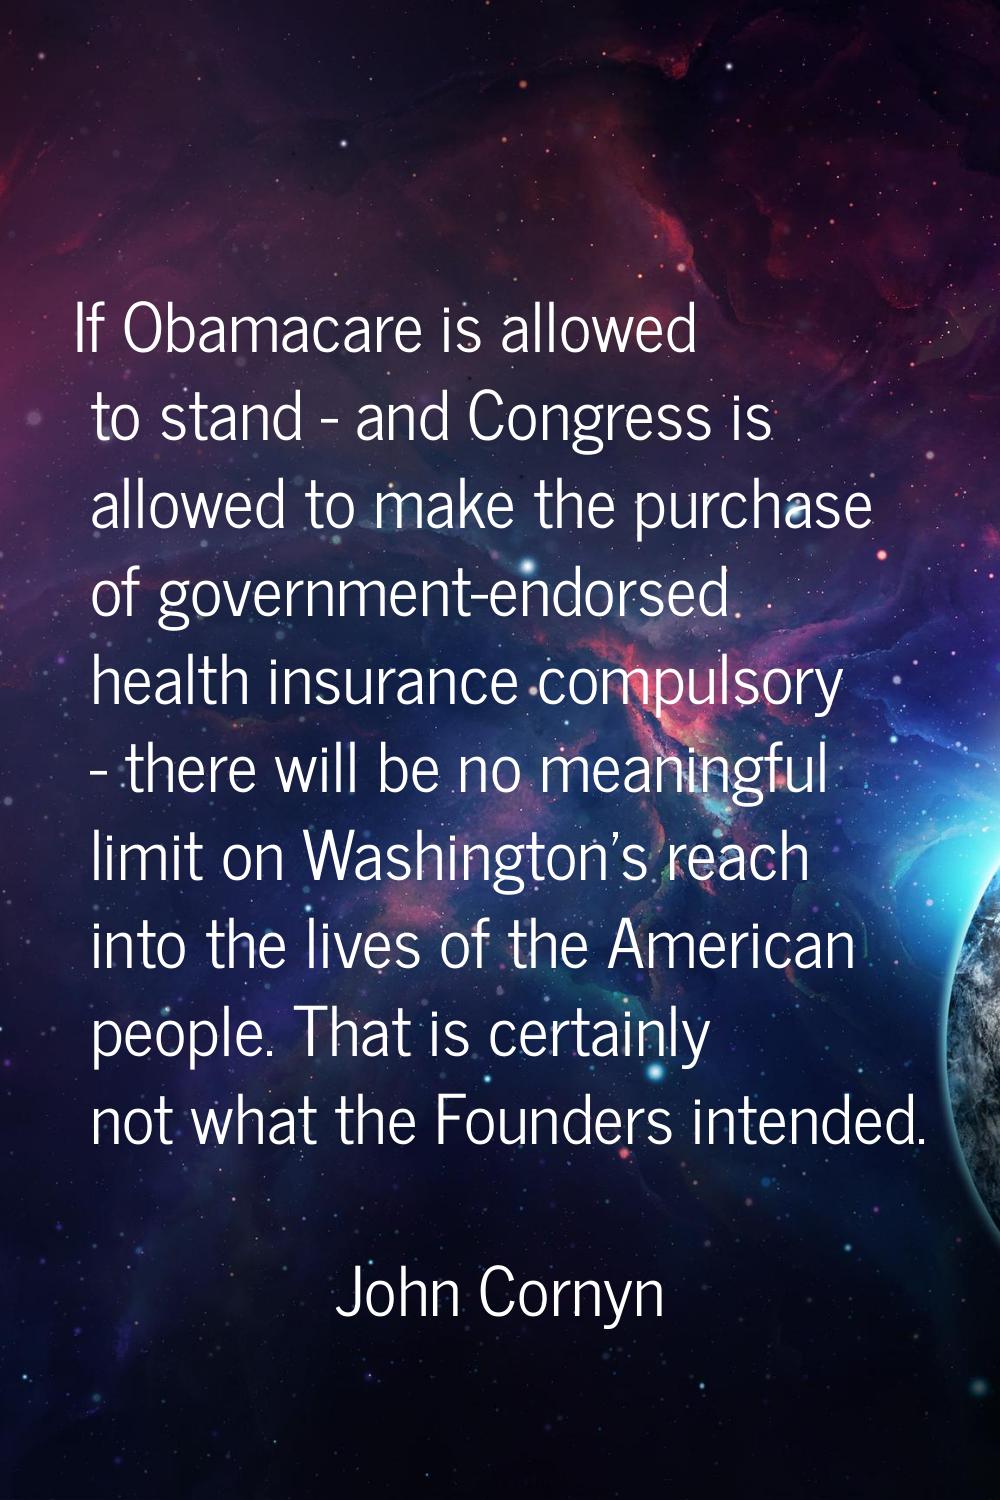 If Obamacare is allowed to stand - and Congress is allowed to make the purchase of government-endor